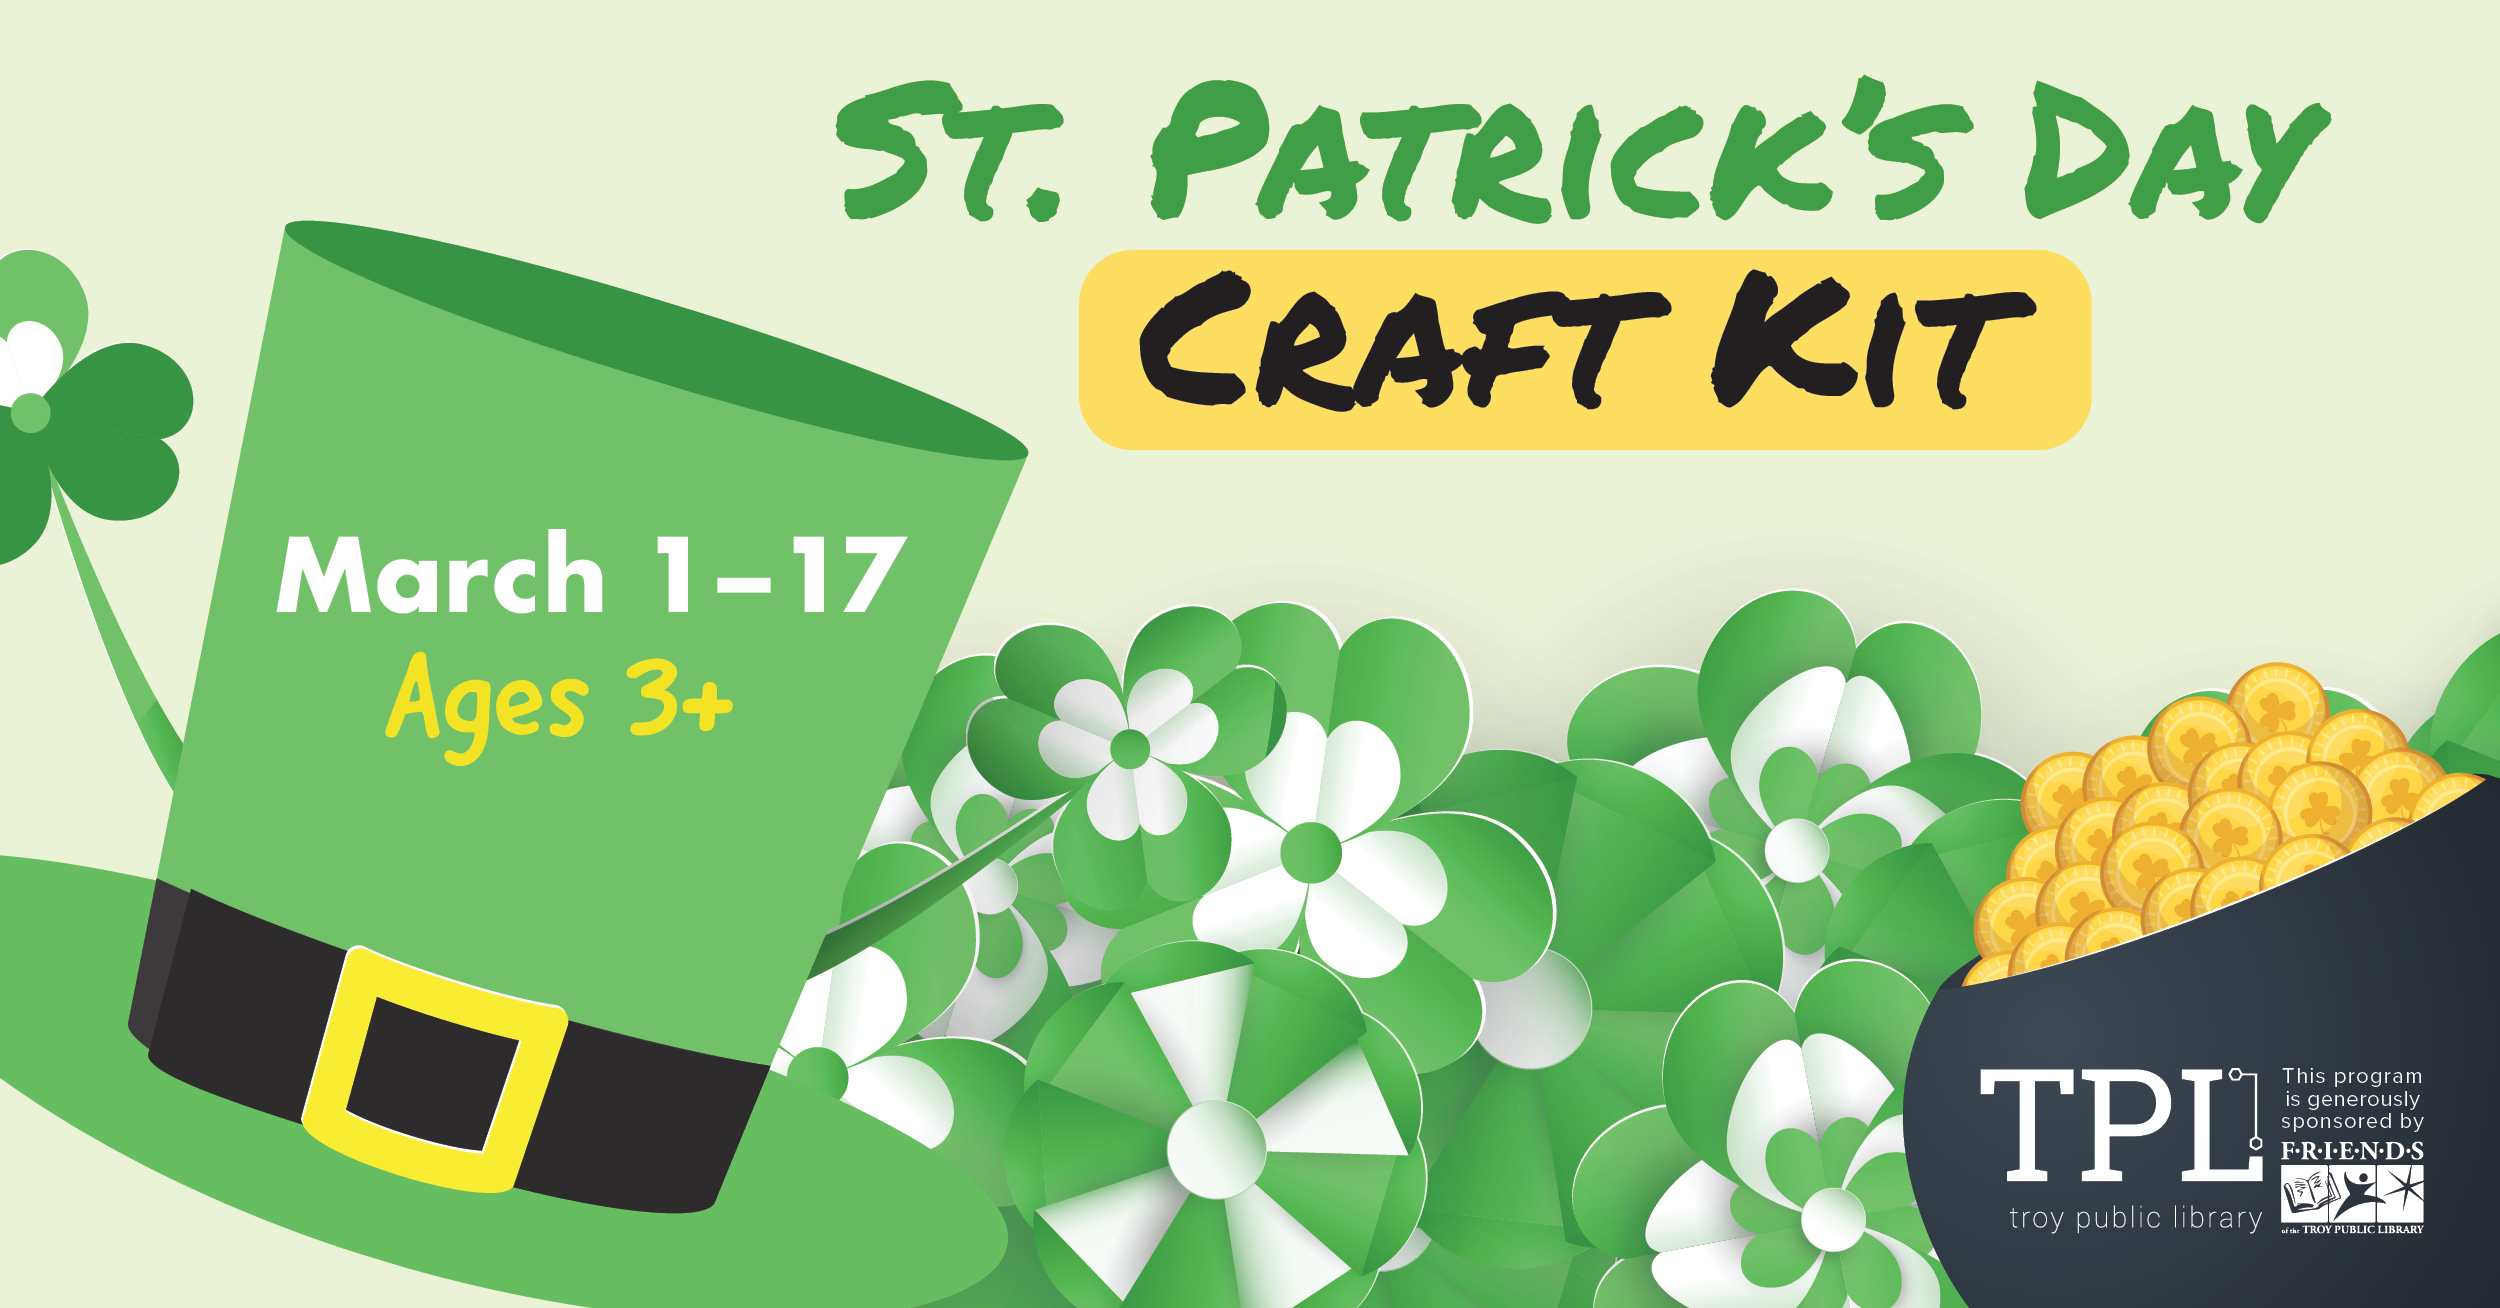 St. Patrick's Day Craft Kit March 1-17 Ages 3+ While Supplies Last. Sponsored by the Friends of the Troy Public Library